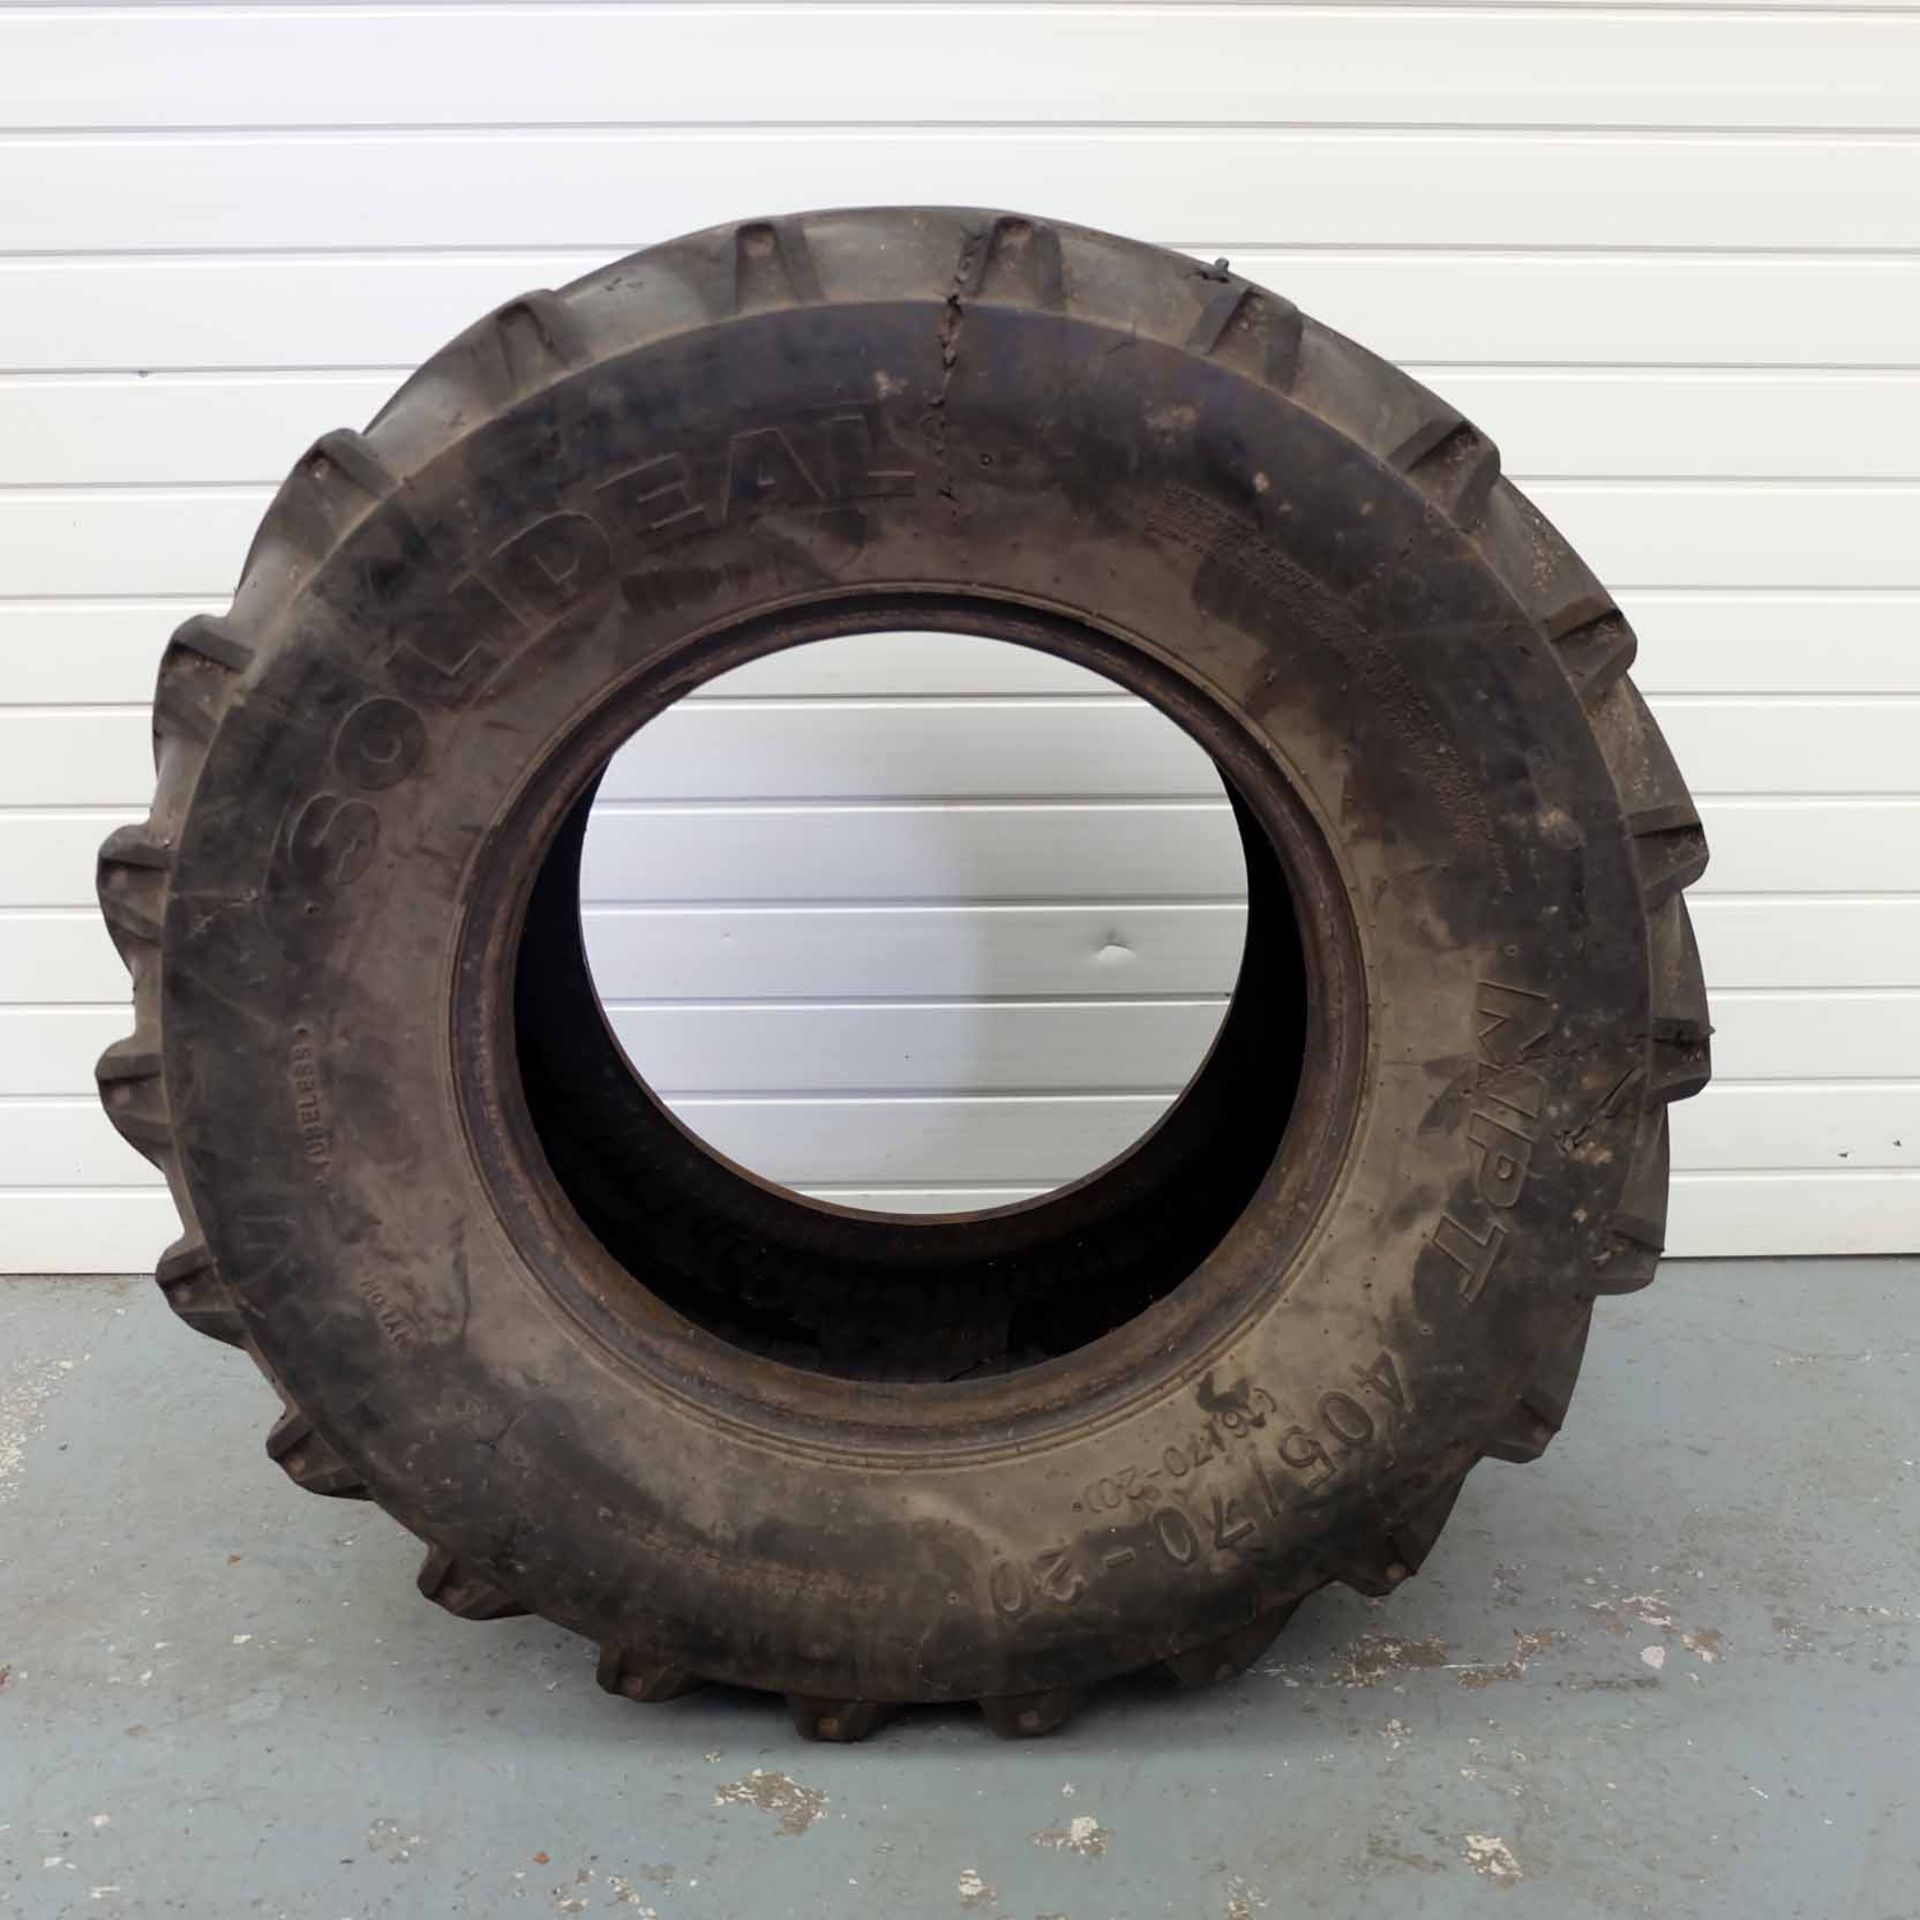 Telehandler Tyre. Solideal MPT 405/70-2. (16/70-20) - Image 5 of 6